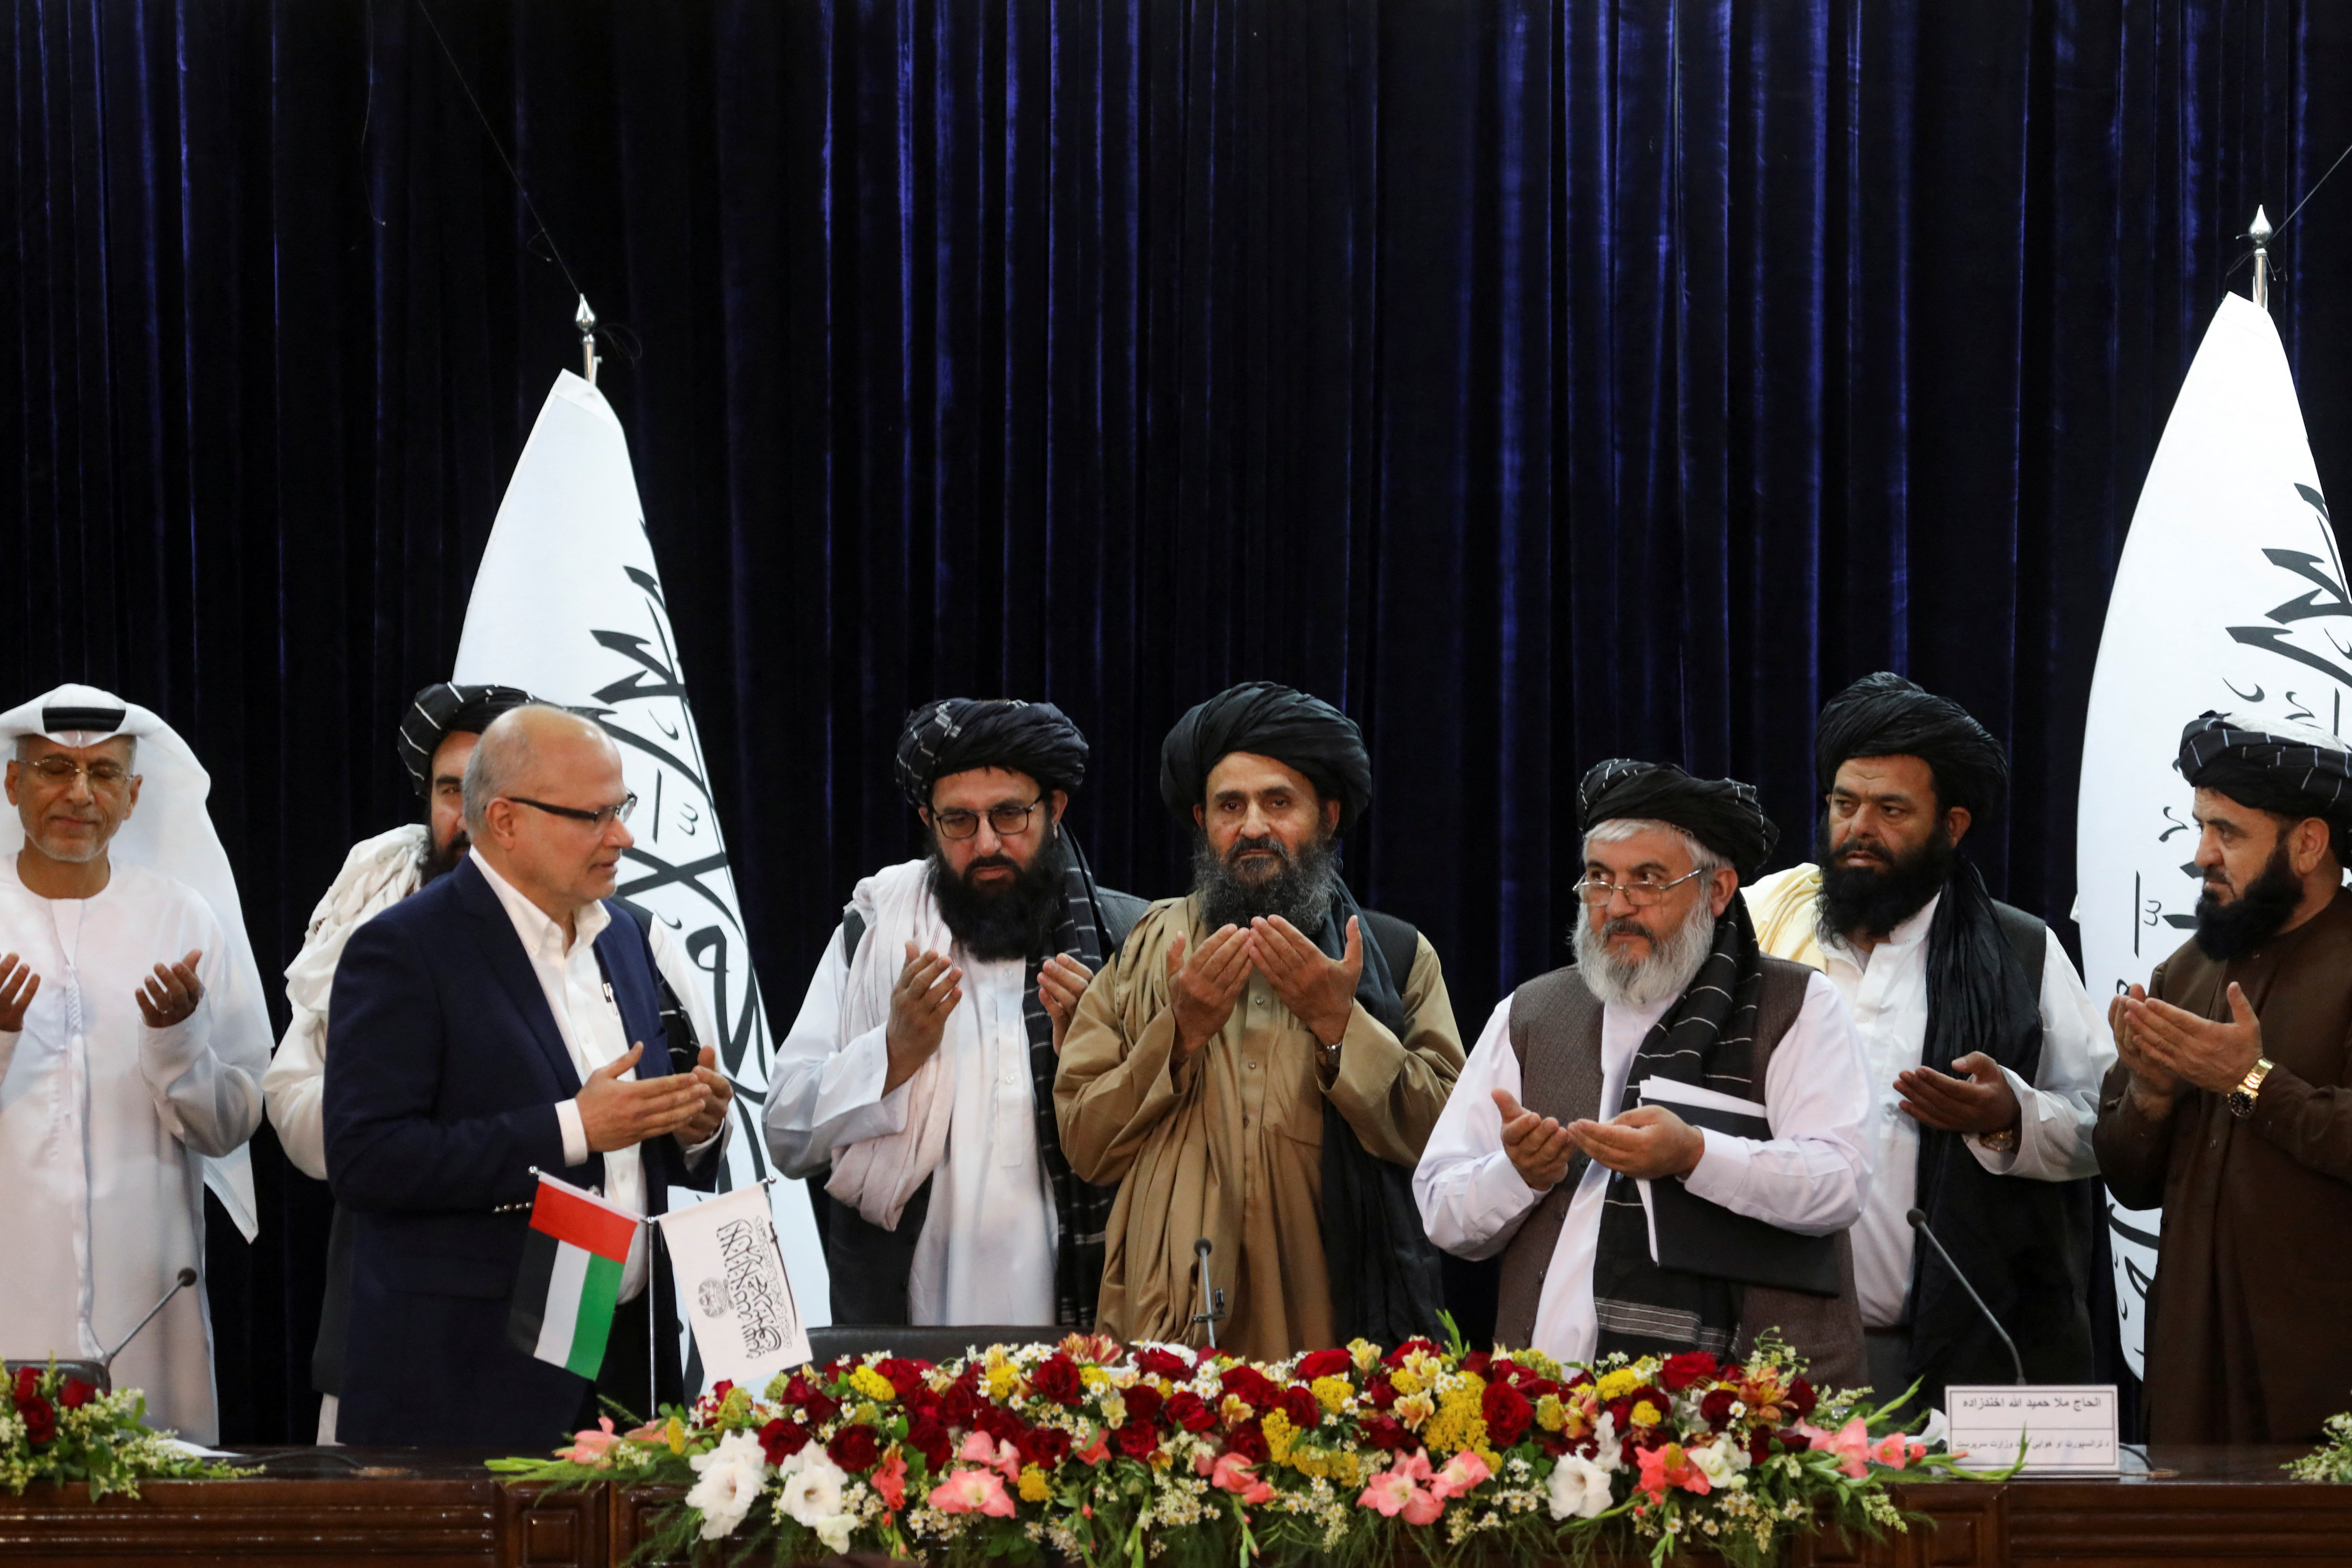 UAE firm CFO and Taliban pray at the end of signing ceremony in Kabul